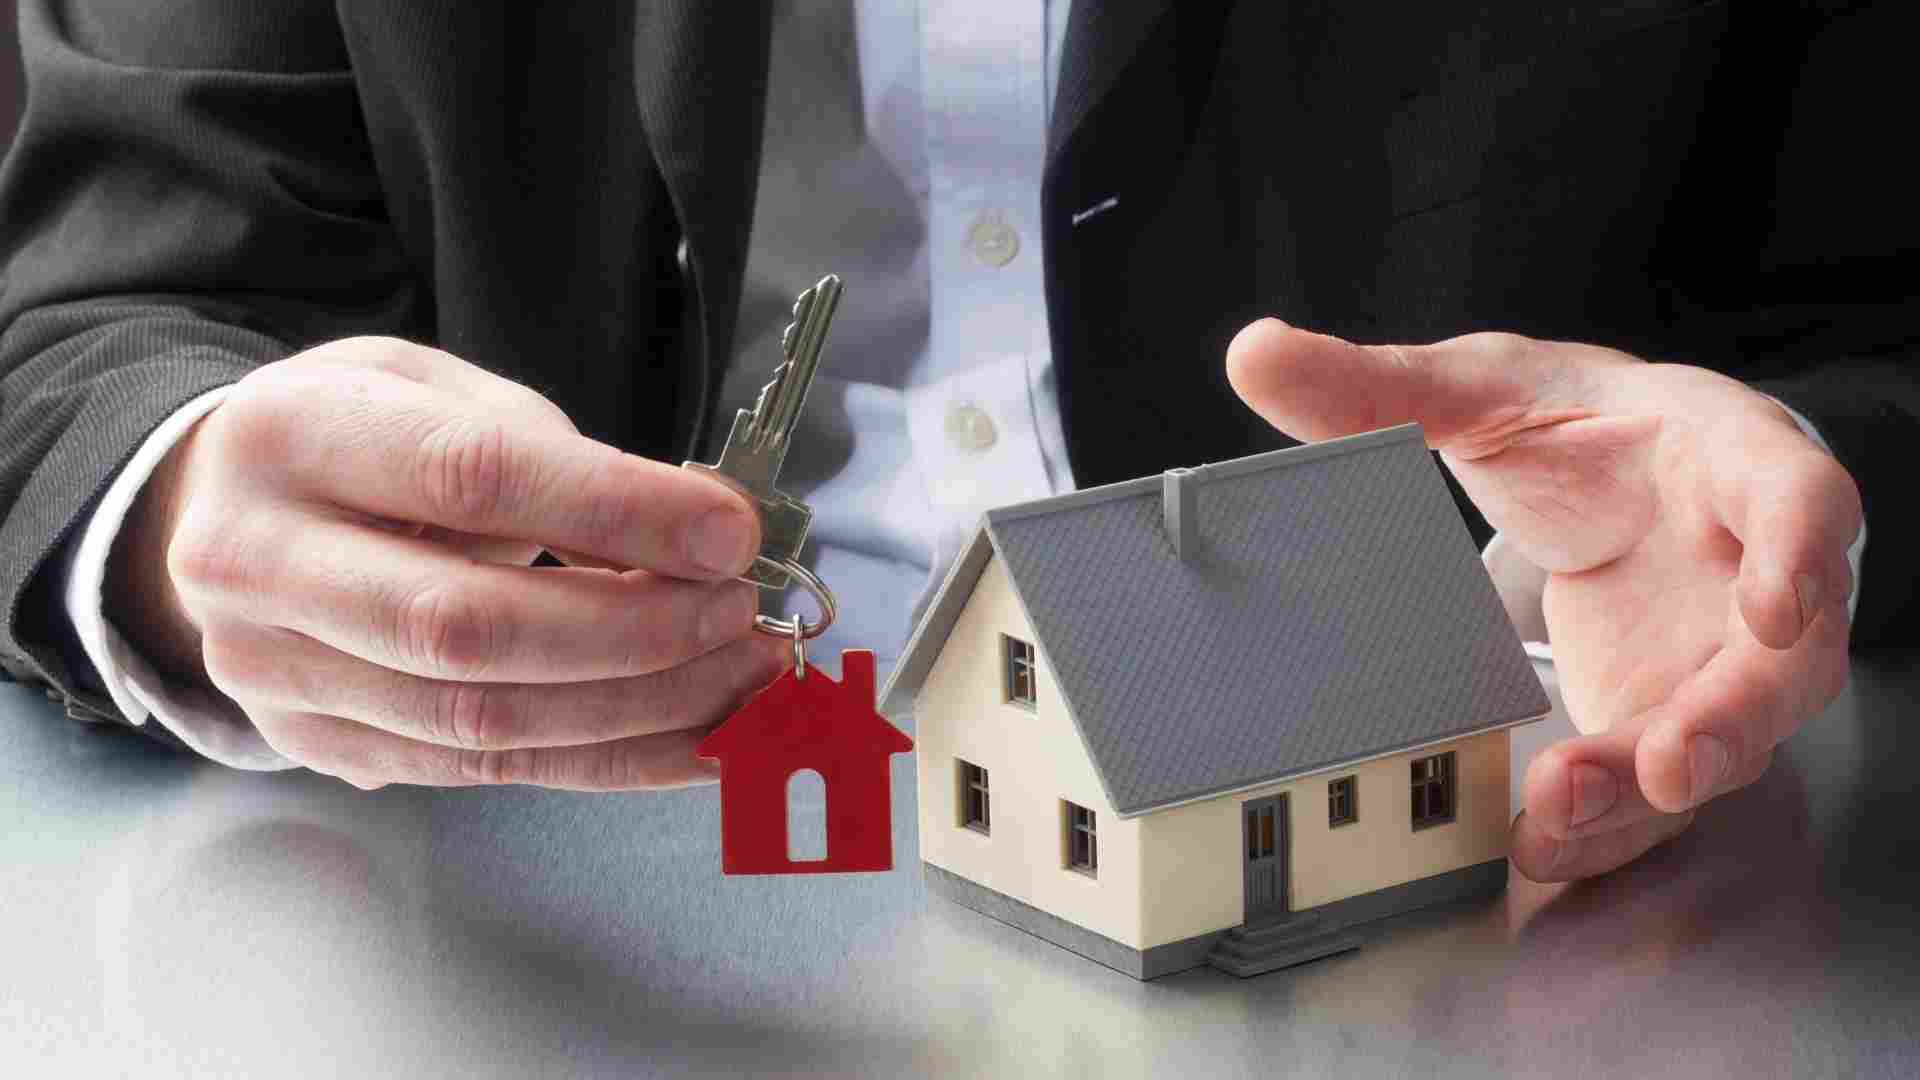 person holding a red key next to a house figurine